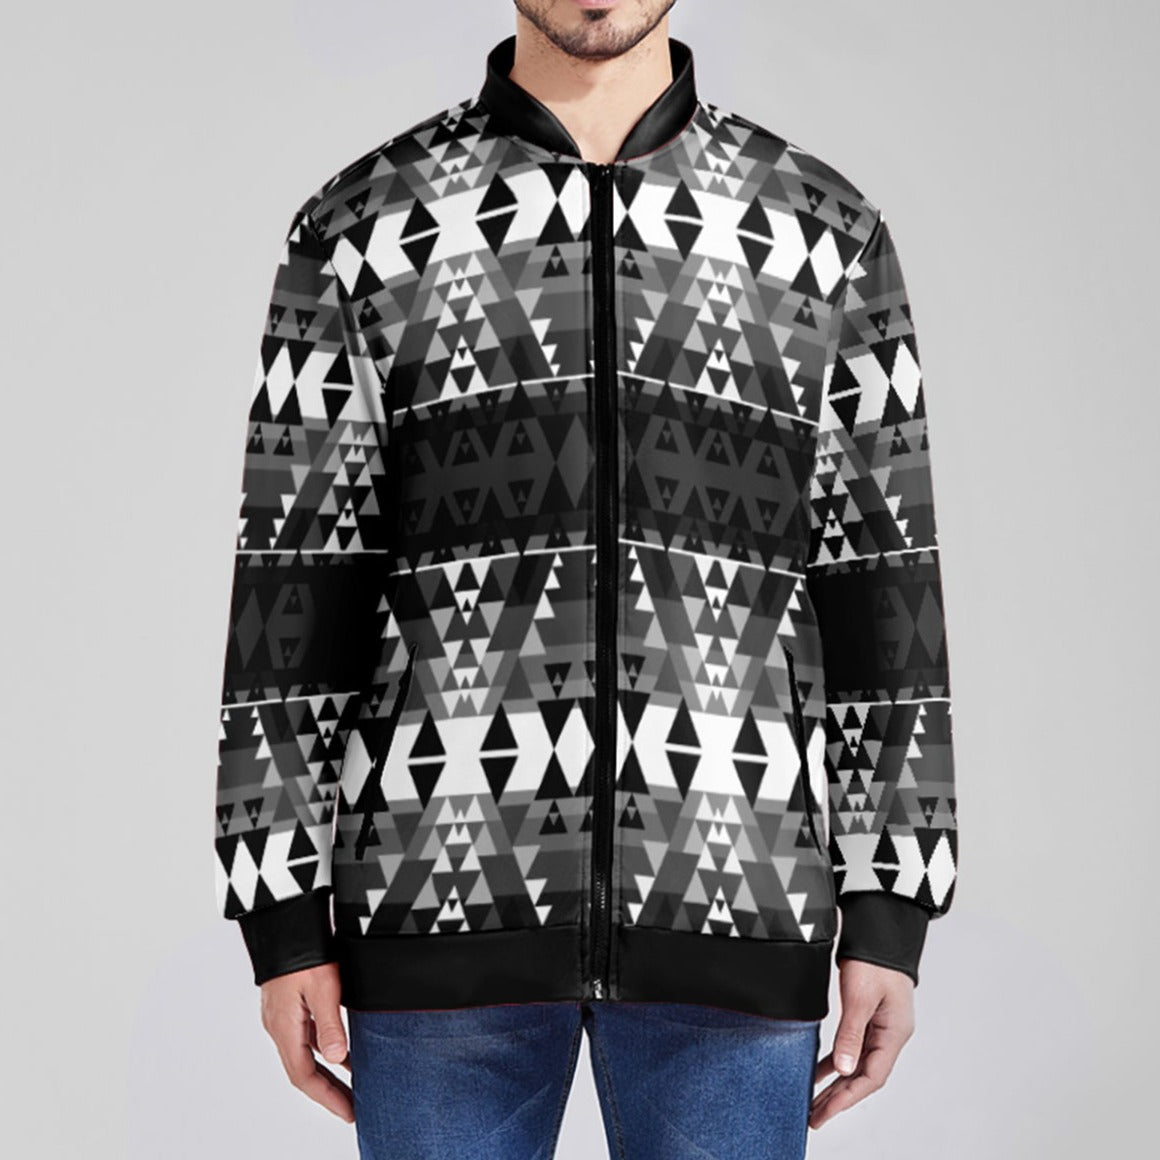 Writing on Stone Black and White Zippered Collared Lightweight Jacket